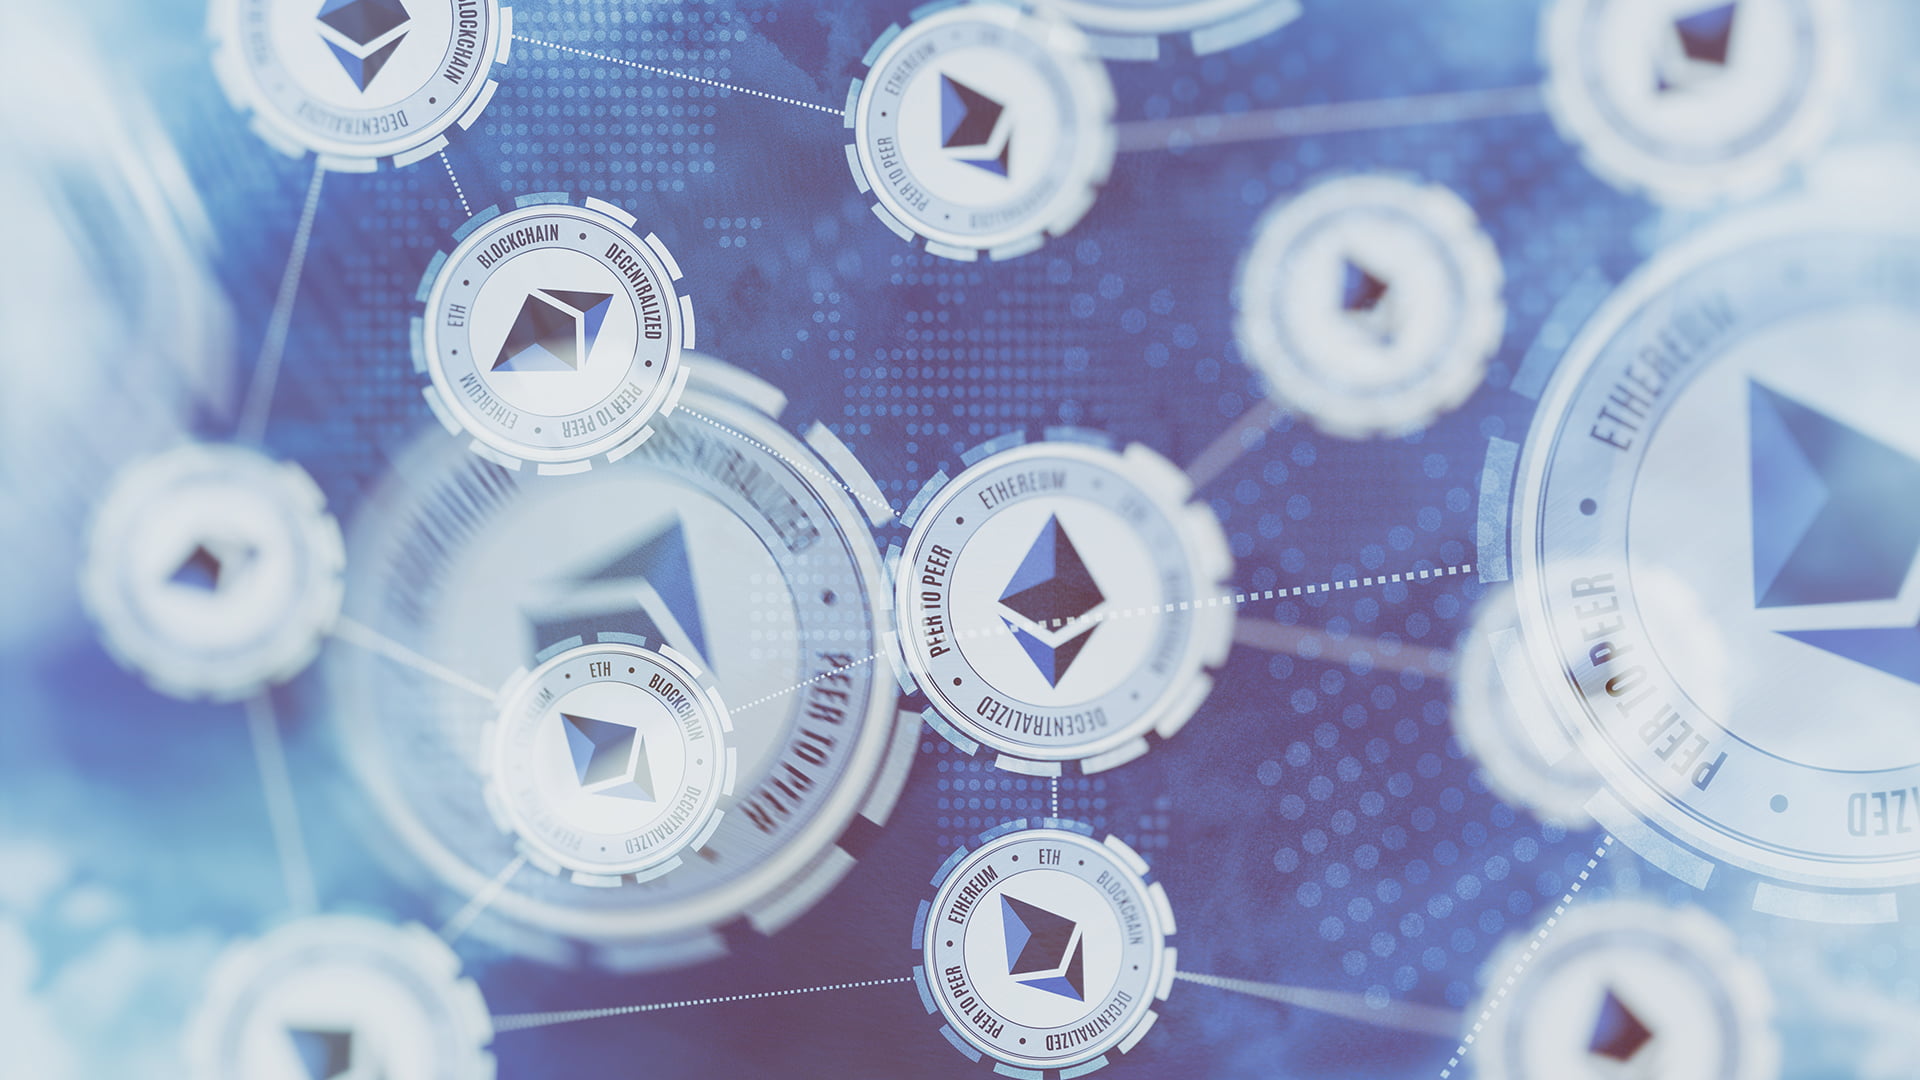 Ethereum Core developers plan to switch the network to Proof-of-Stake in August